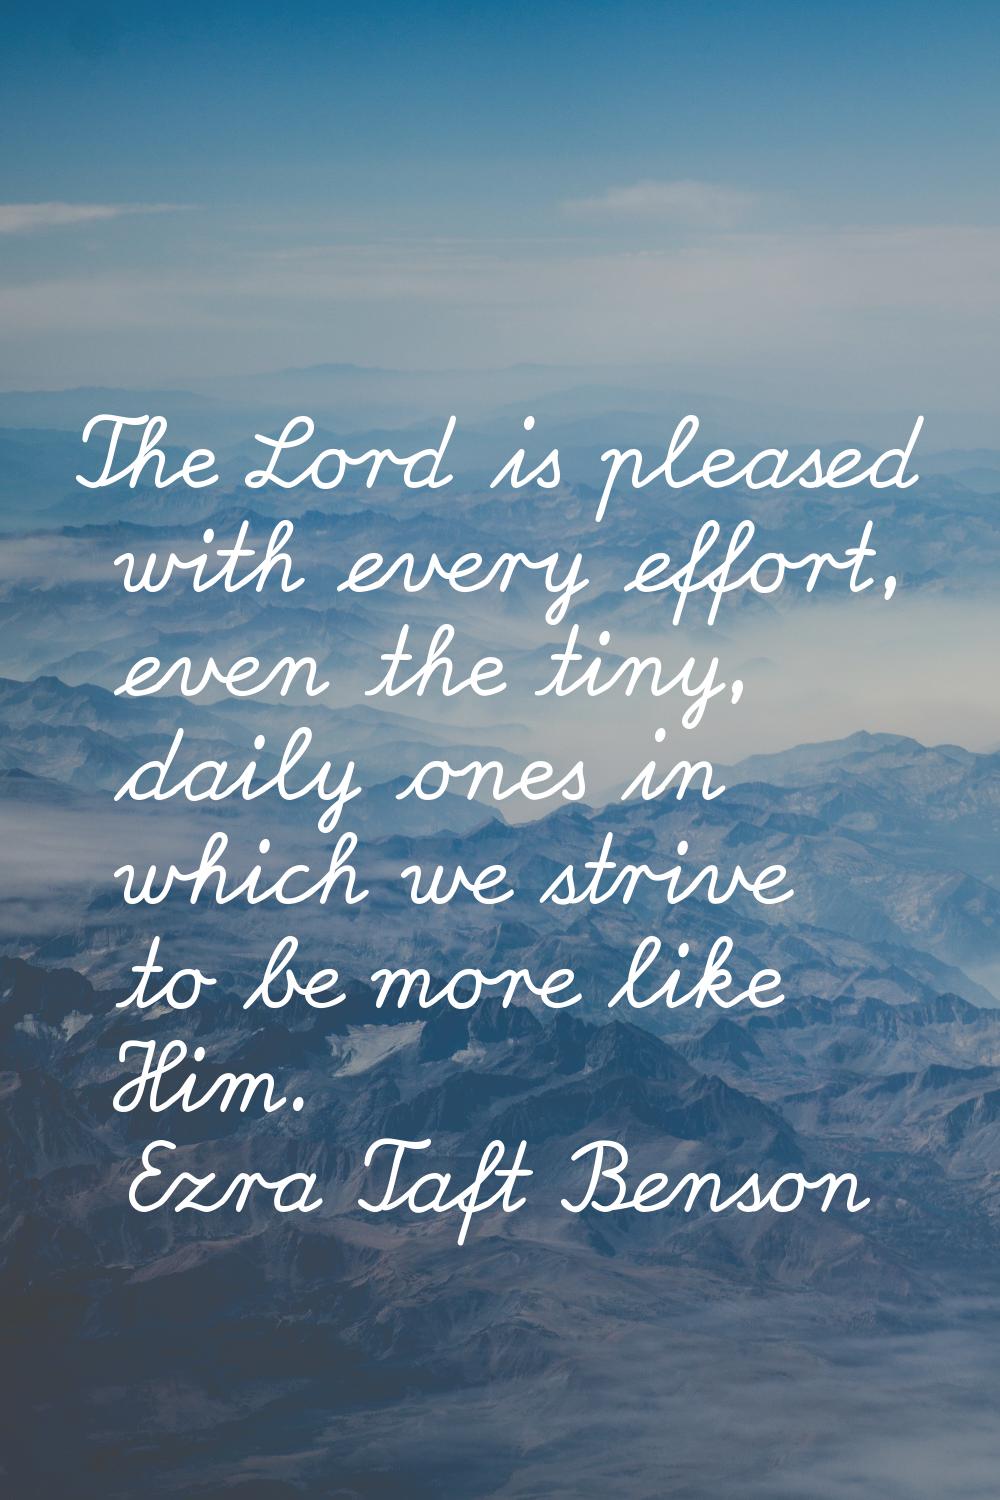 The Lord is pleased with every effort, even the tiny, daily ones in which we strive to be more like